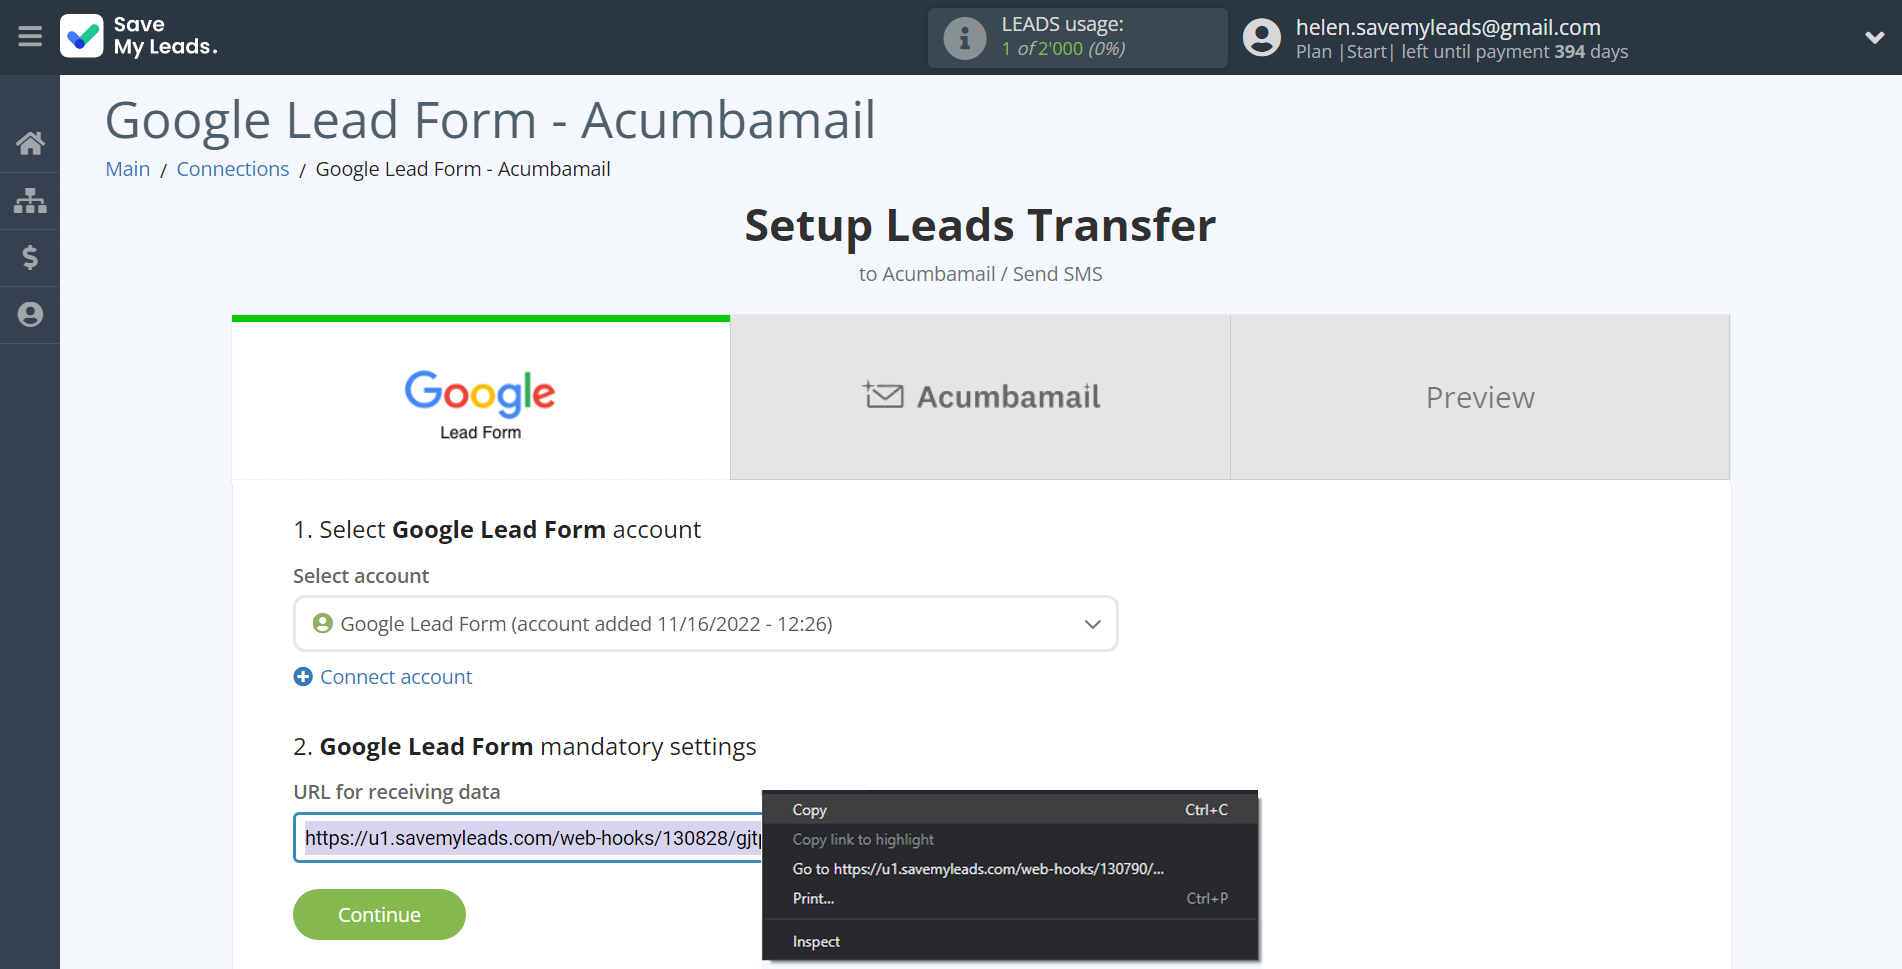 How to Connect Google Lead Form with Acumbamail Send SMS | Data Source account connection